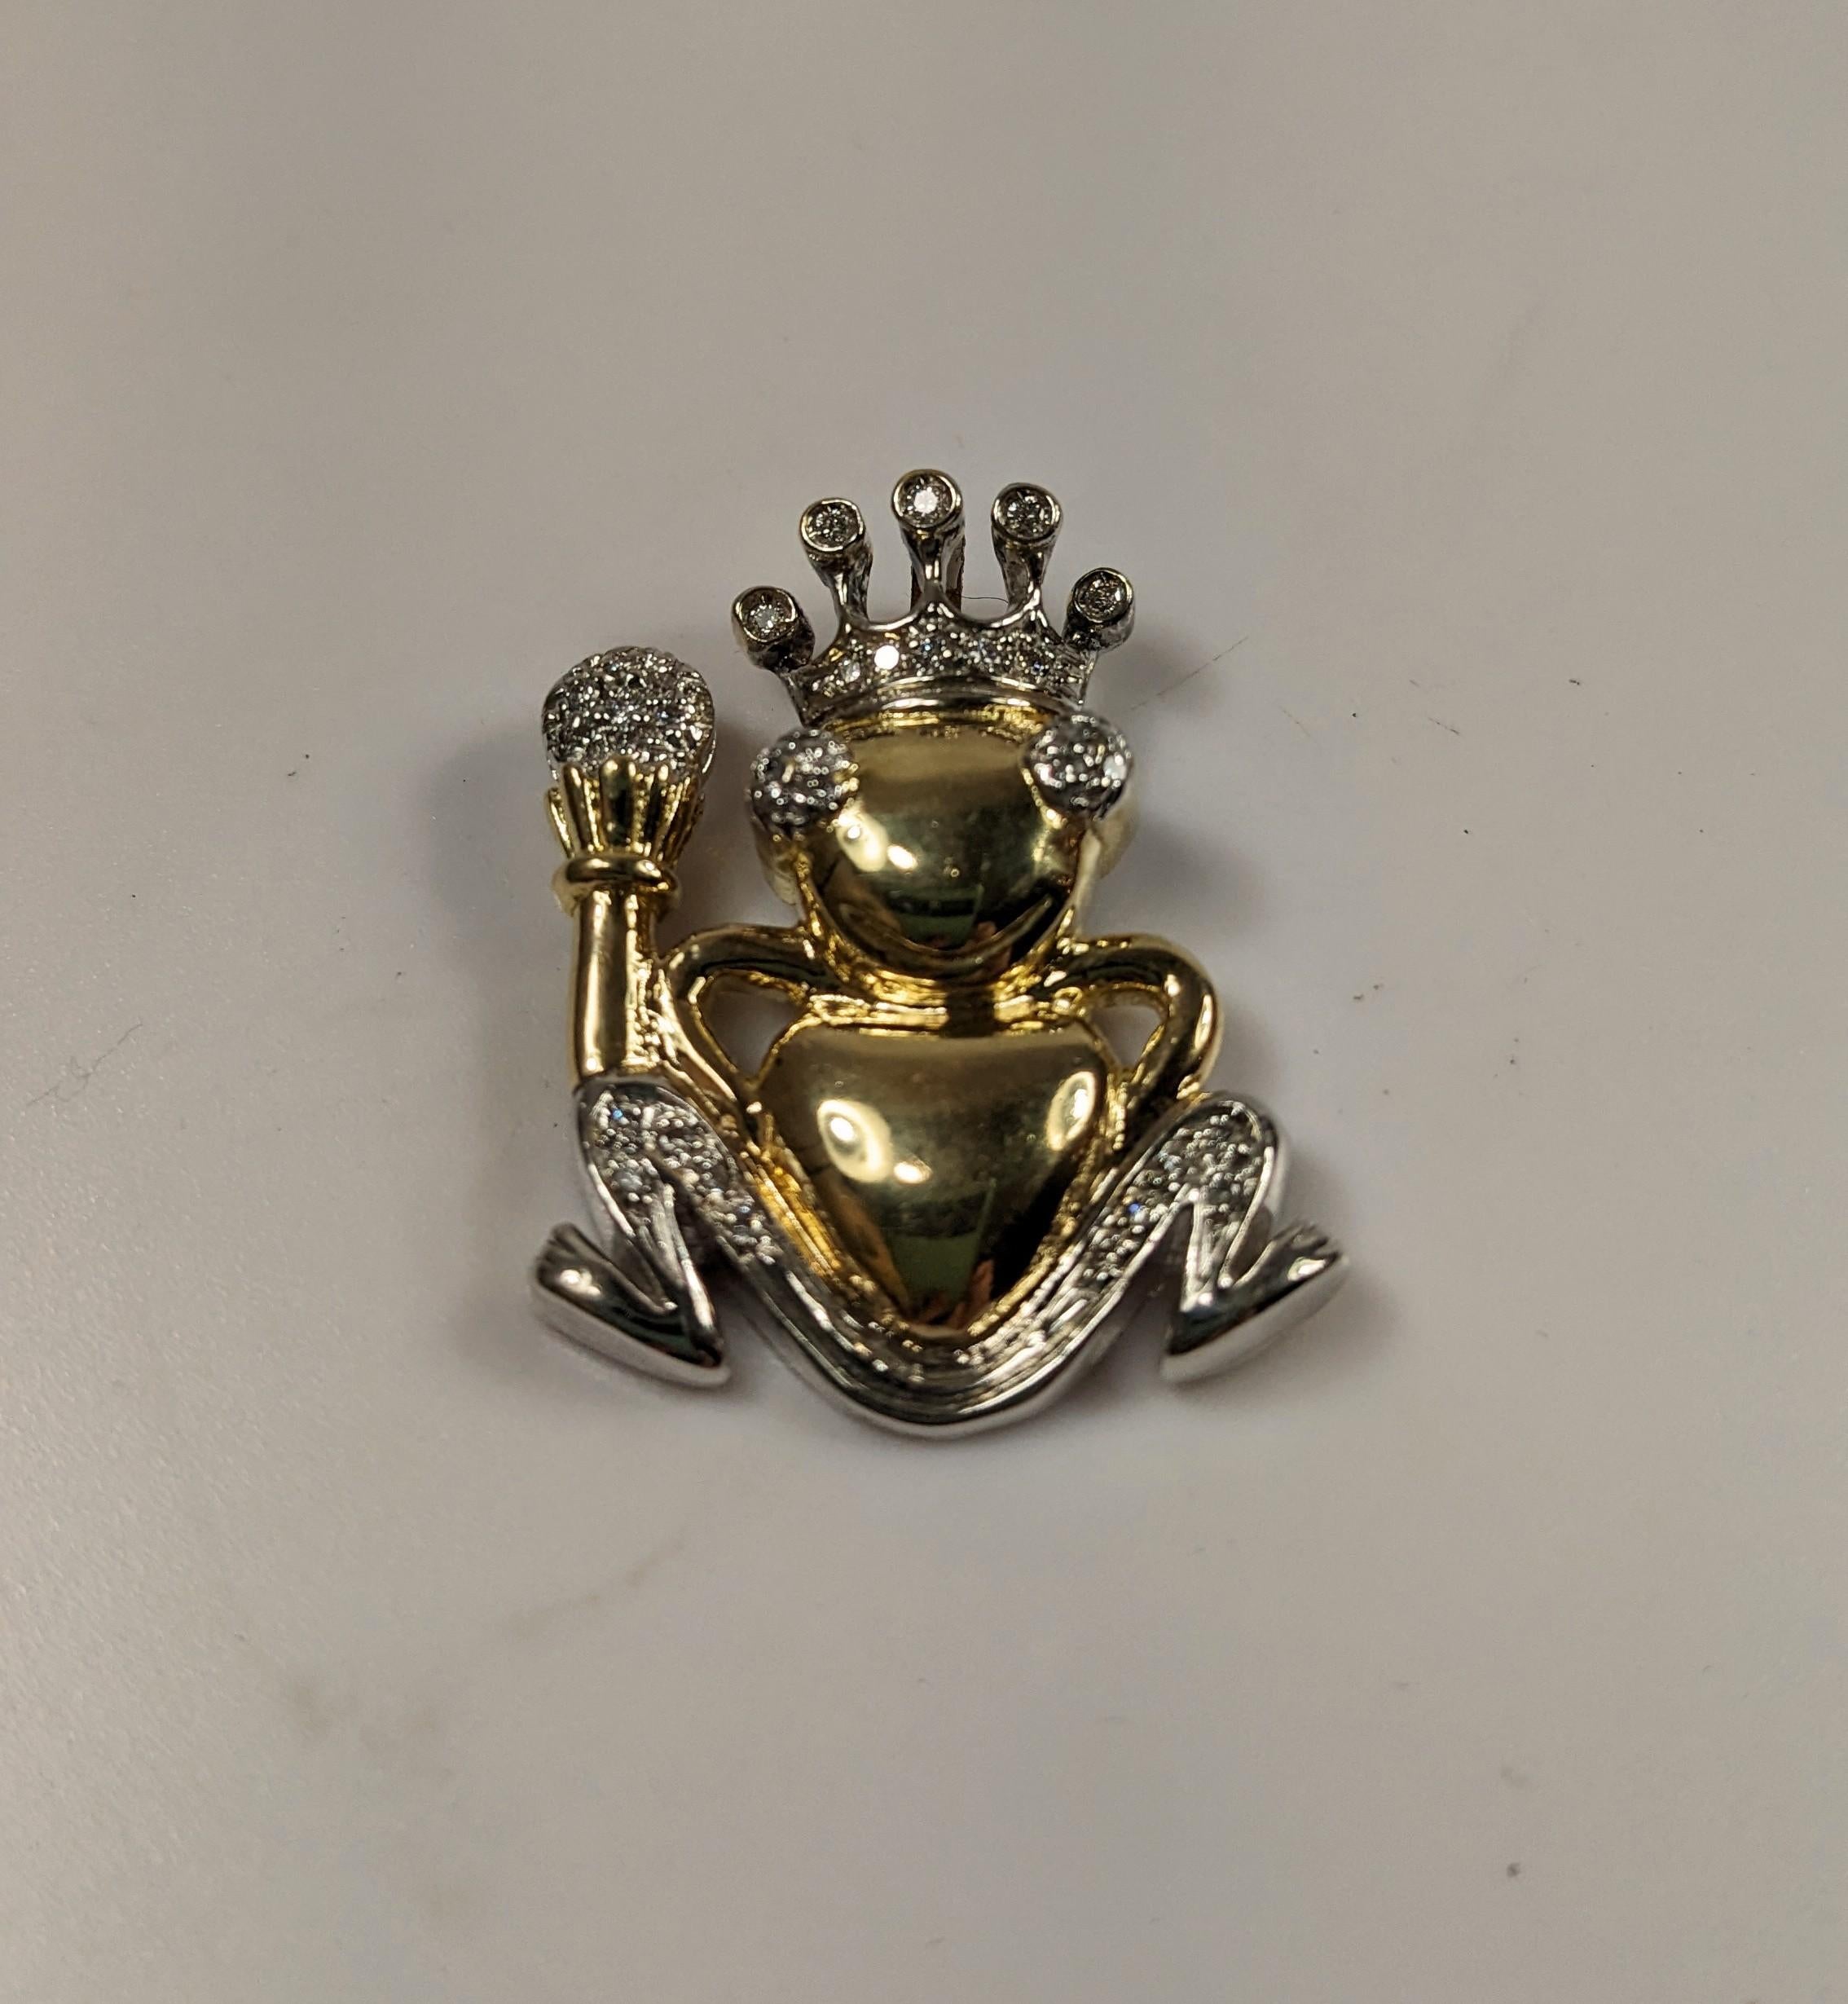 18k yellow gold pendant with frog motif with scepter and crown decorated with brilliant whites in white gold views
34 bts  0,30 ct aprox
Color H  Purity VS
Measure  28mm  1,1 inches
Weight  8,1 gr

PRADERA is a  second generation of a family run